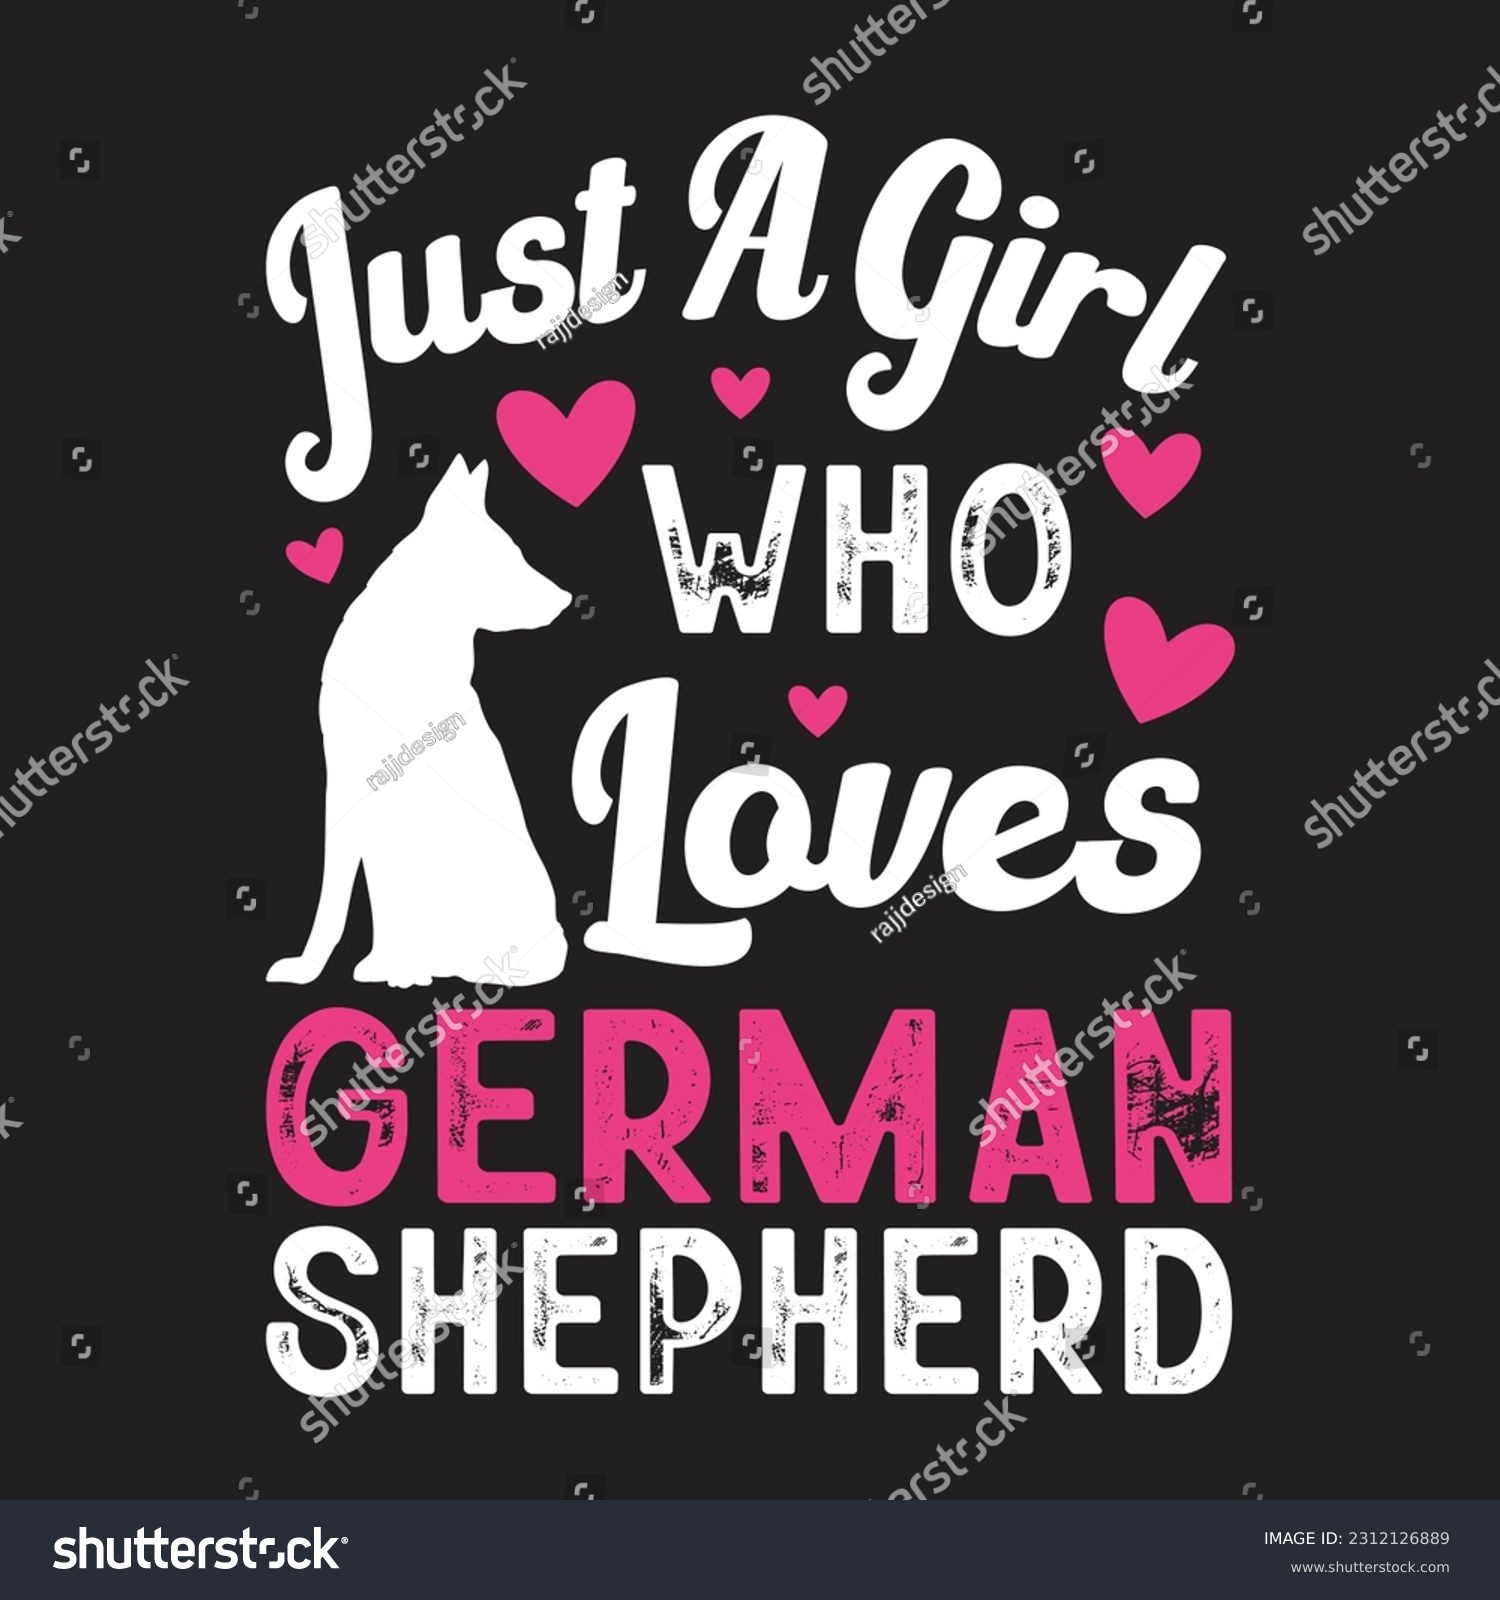 SVG of Just A Girl Who Loves German Shepherd T-Shirt Design, Posters, Greeting Cards, Textiles, and Sticker Vector Illustration svg